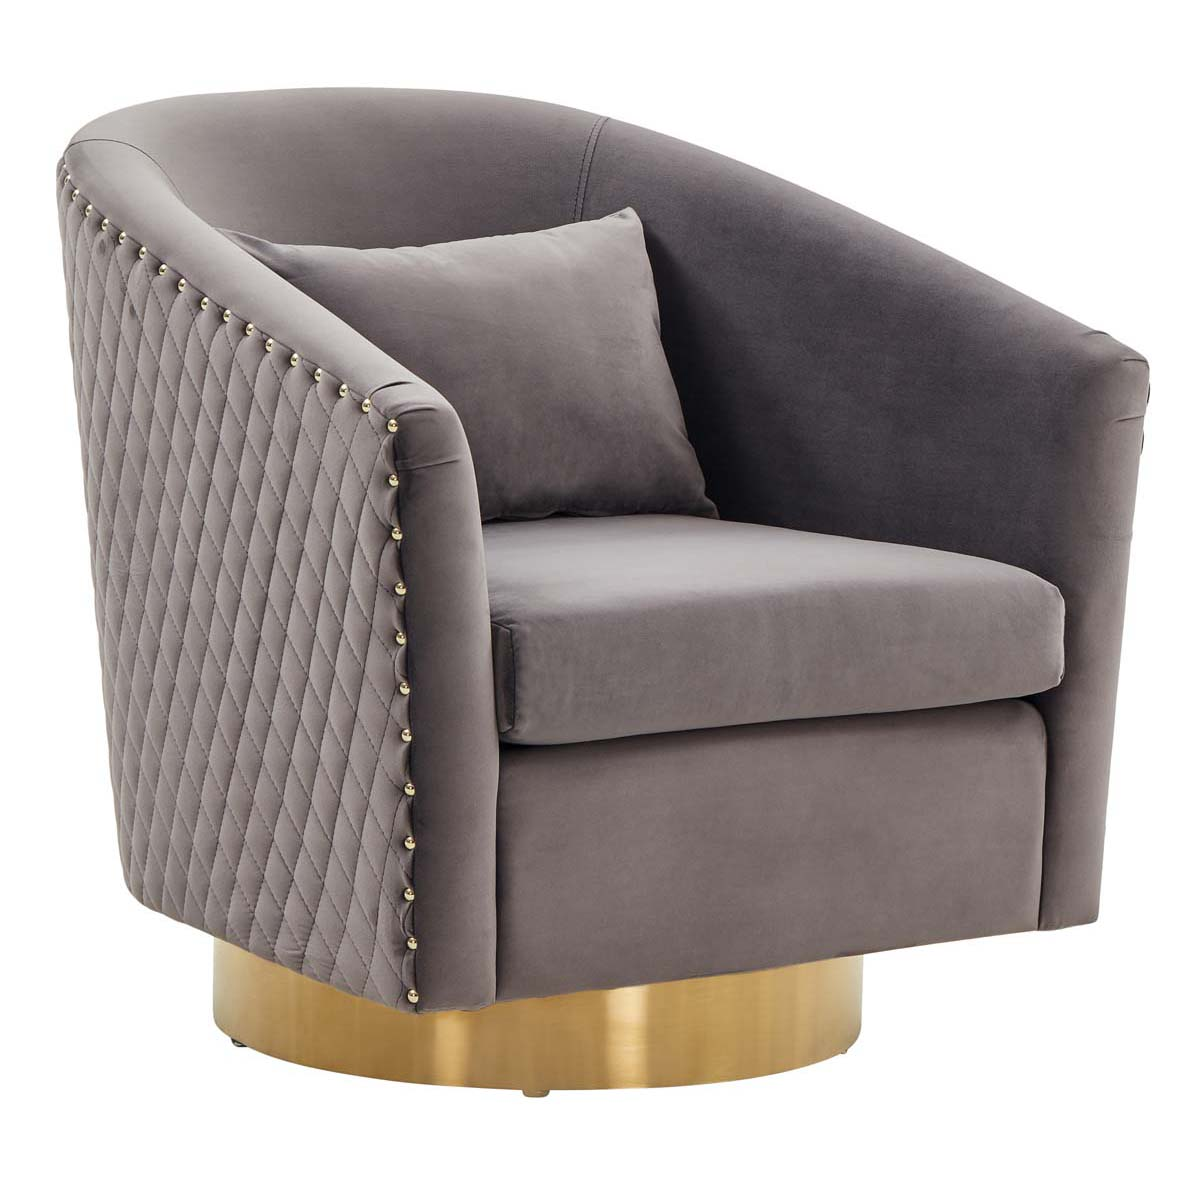 Safavieh Couture Clara Quilted Swivel Tub Chair - Slate Grey